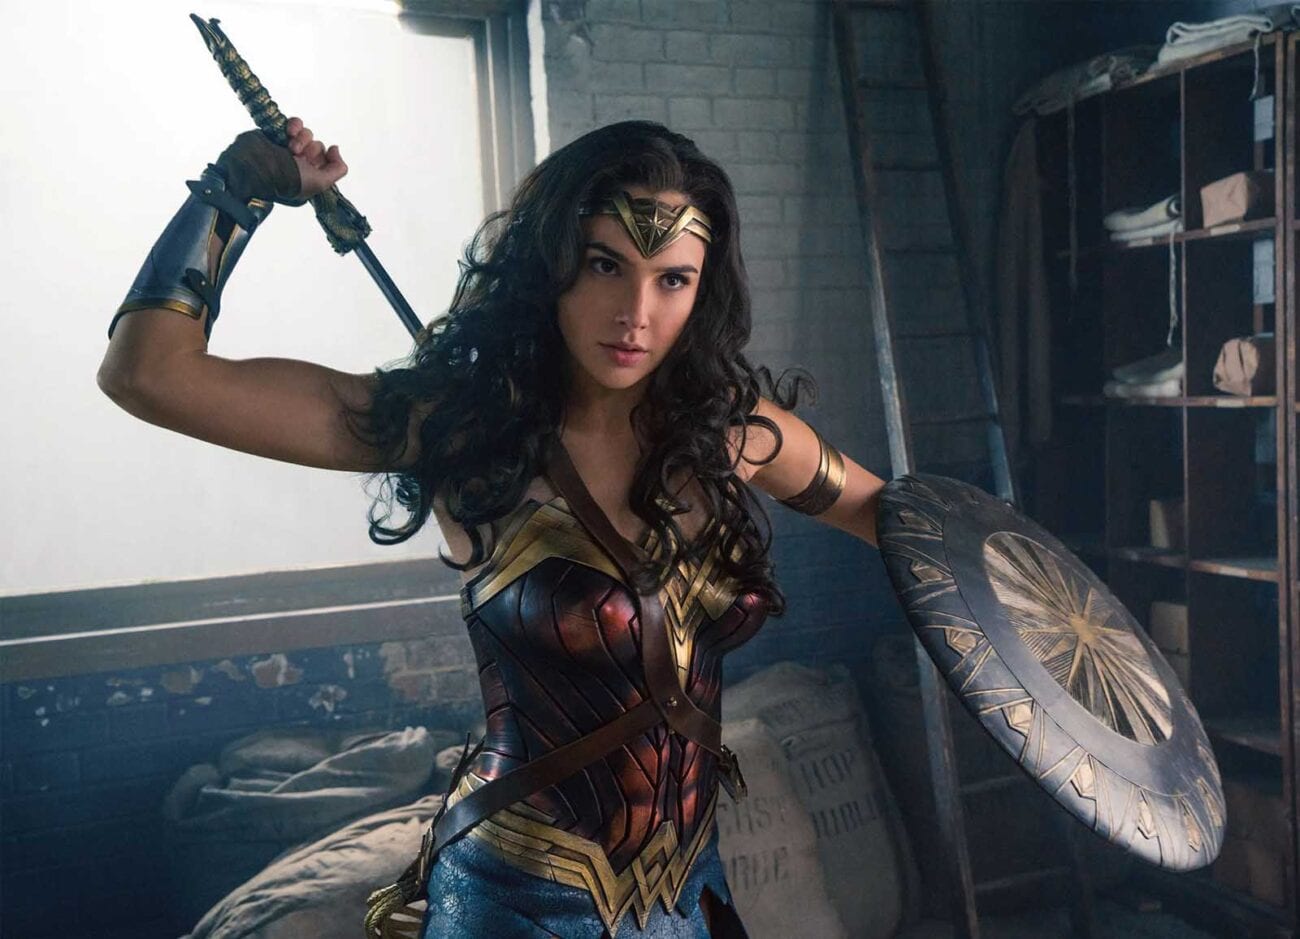 Before 'Wonder Woman 1984' is even out, fans are wondering if Gal Gadot will return for a 'Wonder Woman 3'. See her thoughts on another sequel.